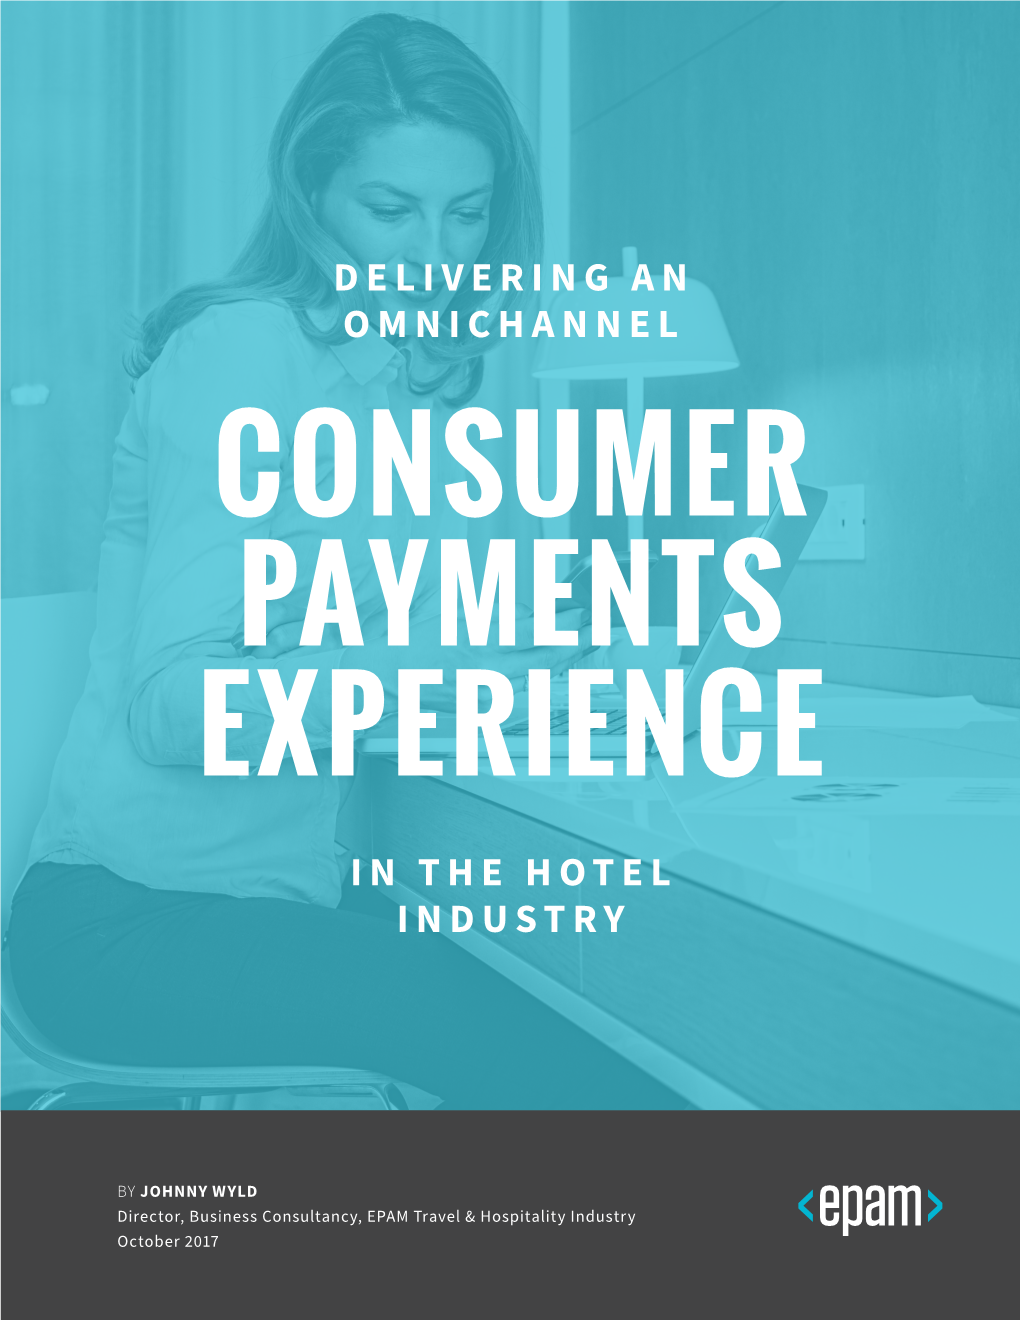 Delivering an Omnichannel in the Hotel Industry